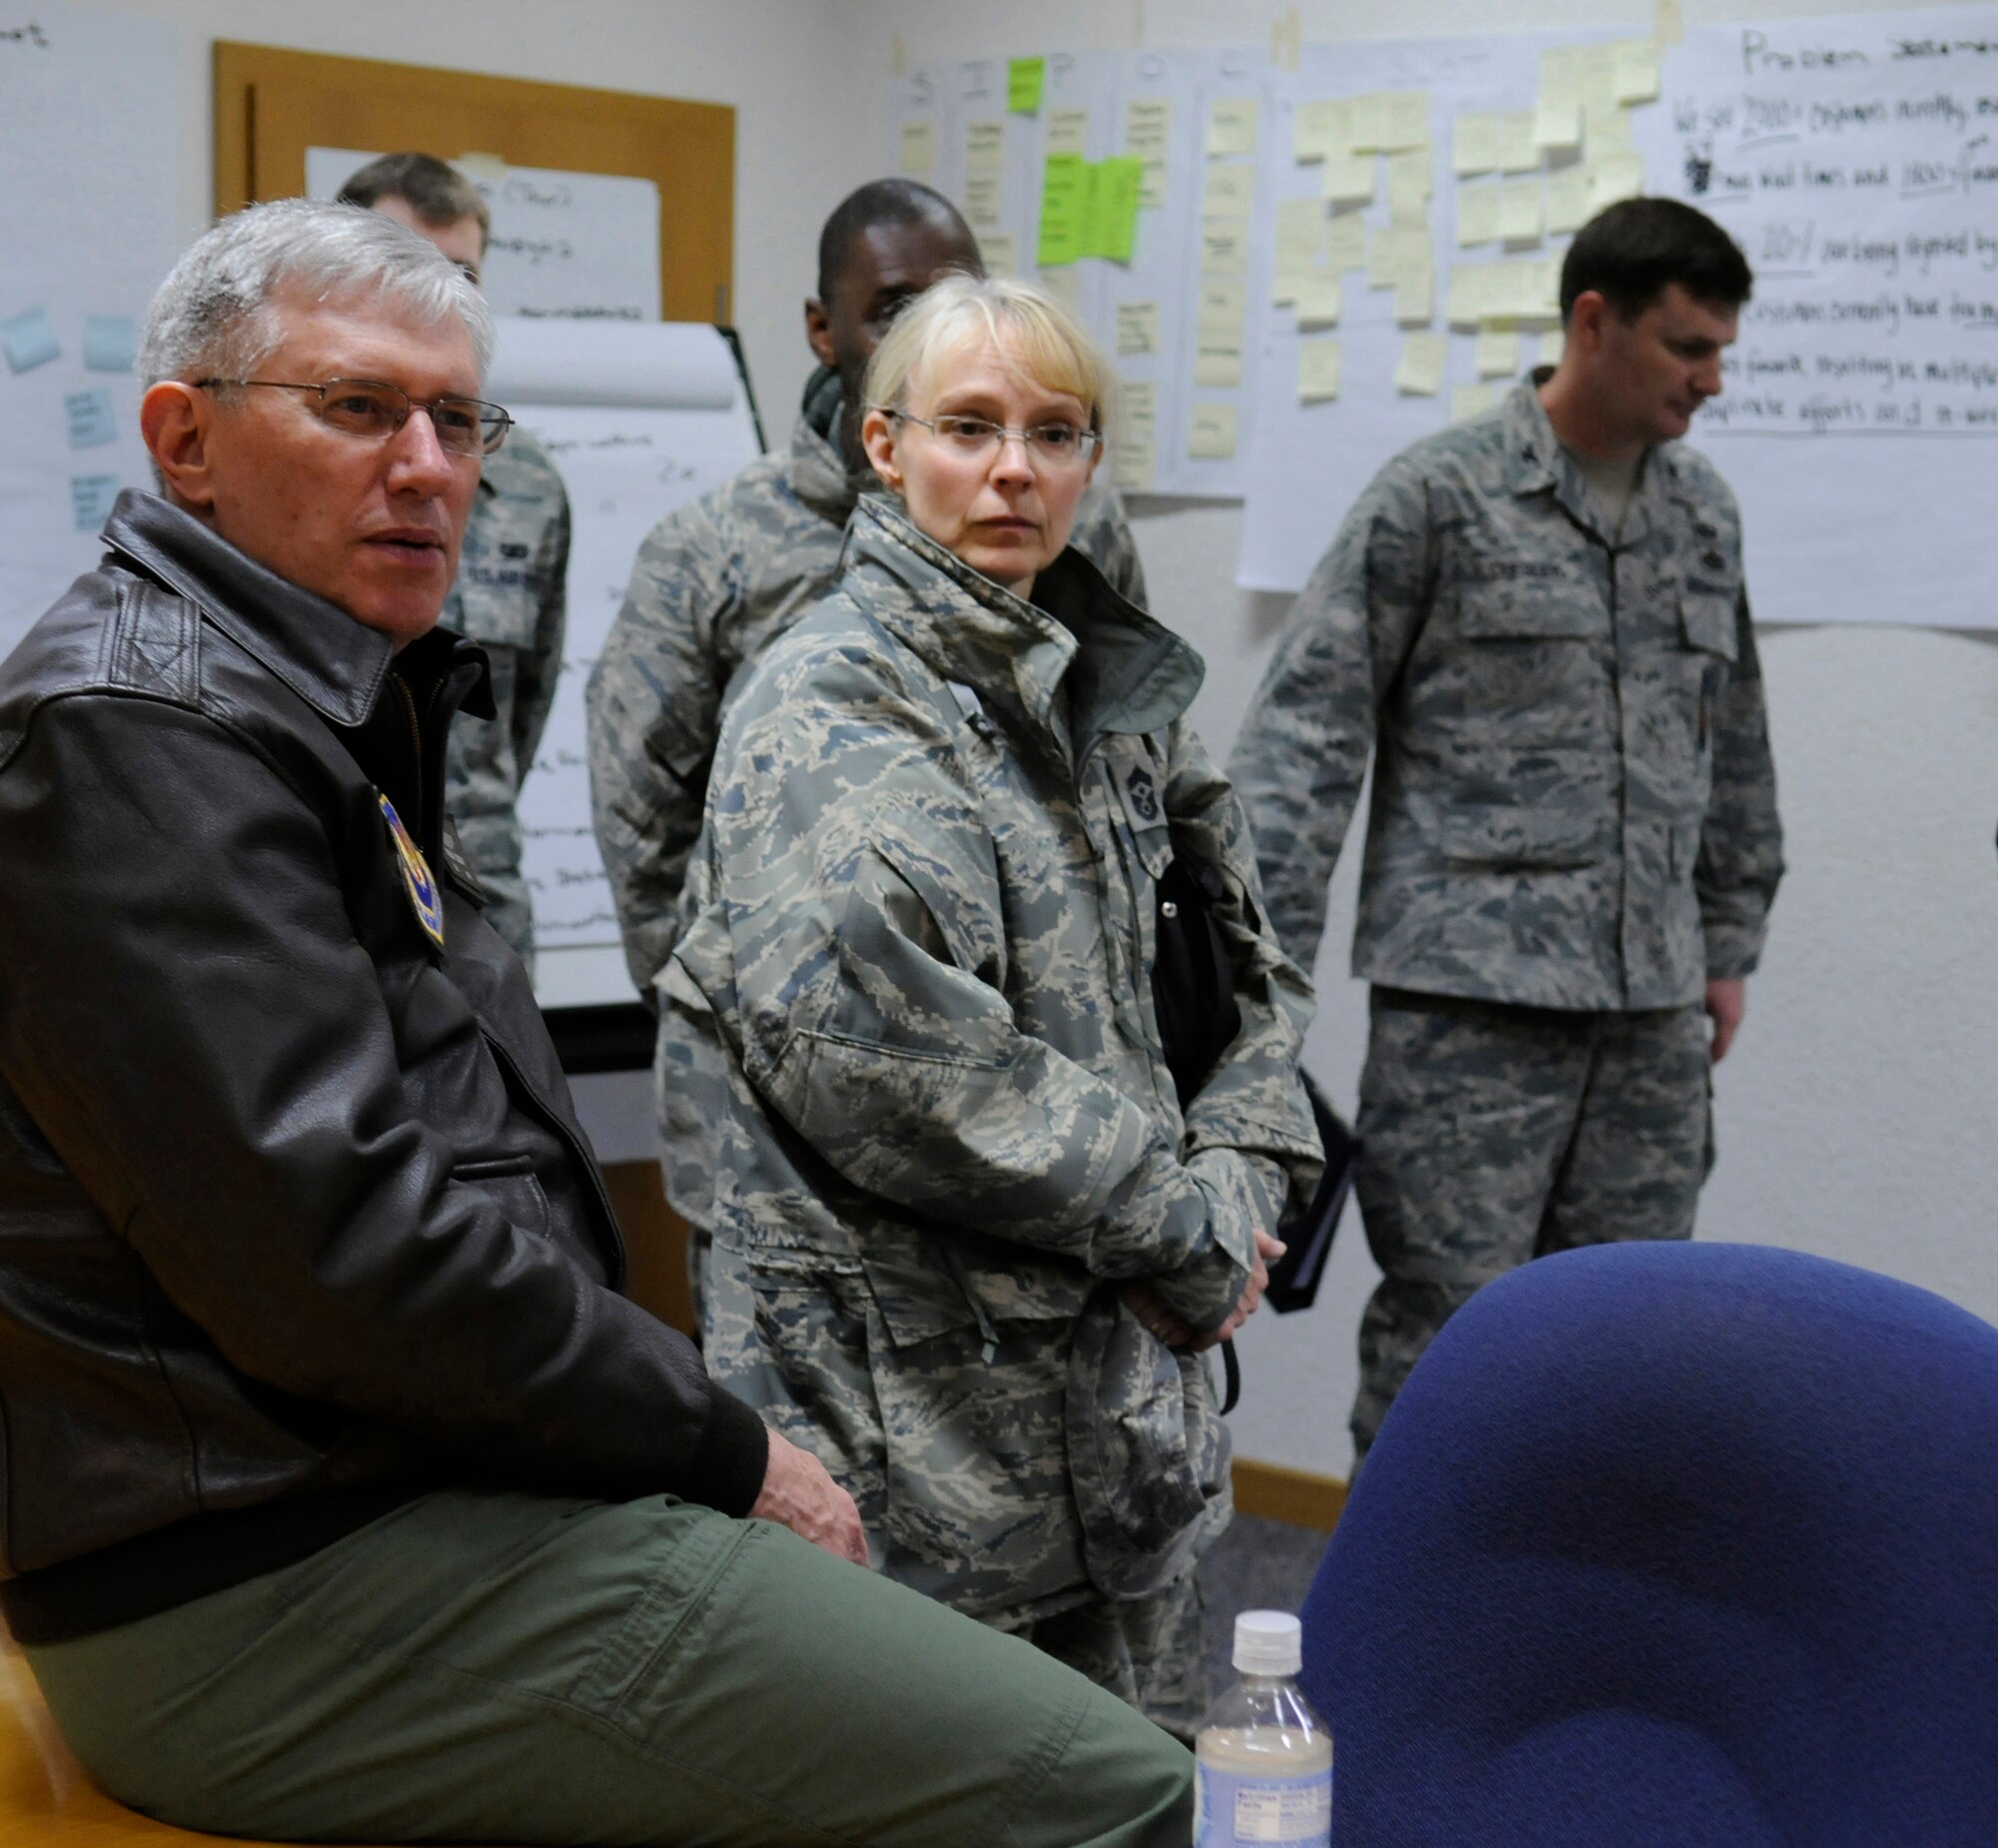 Gen. Roger A. Brady, U.S. Air Forces in Europe commander, along with Chief Master Sgt. Pamela Derrow, USAFE command chief, receives a briefing from members of the 86th Comptroller Squadron as part of his visit to the 86th Airlift Wing, March 2. The unit is currently taking part in an AFSO 21 initiative to improve their finance services across the base and throughout the Kaiserslautern Military Community.  (U.S. Air Force Photo by: Airman 1st Class Brittany Perry)